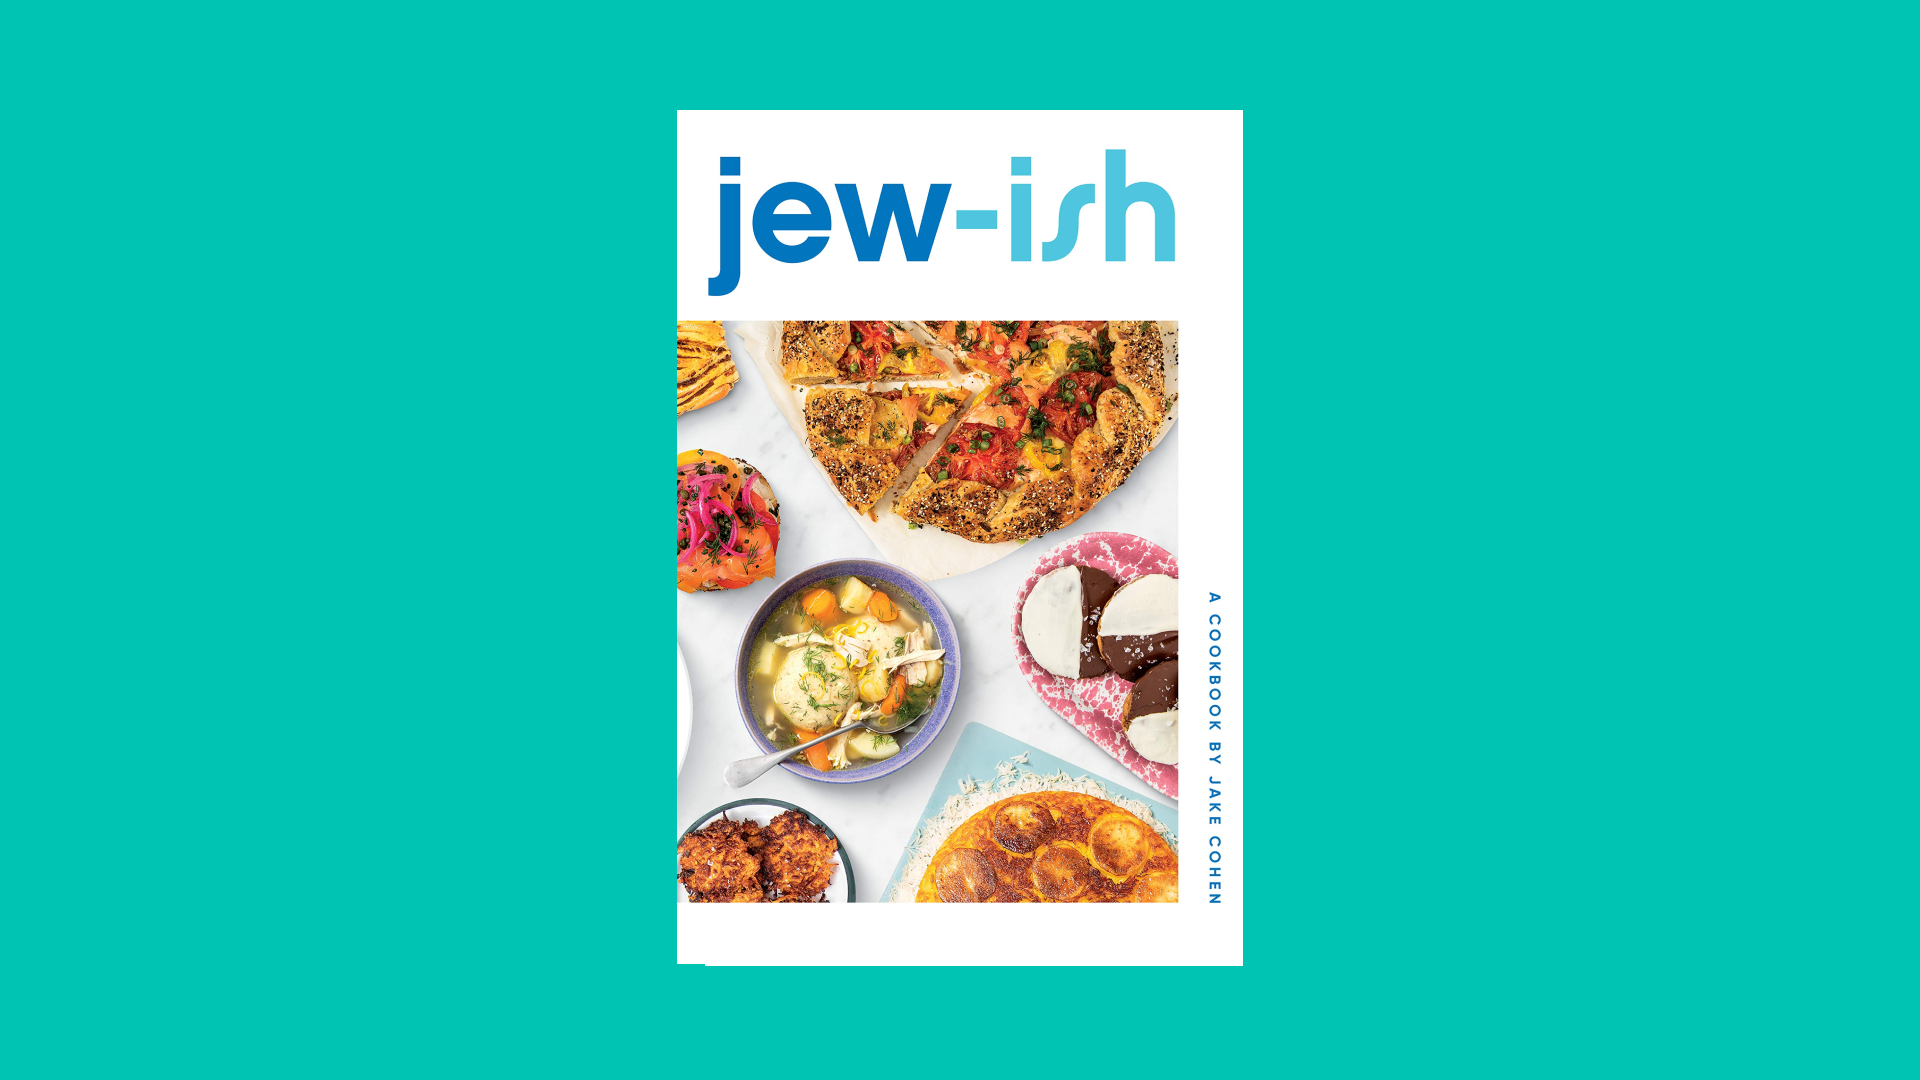 "Jew-ish: Reinvented Recipes from a Modern Mensch” by Jake Cohen